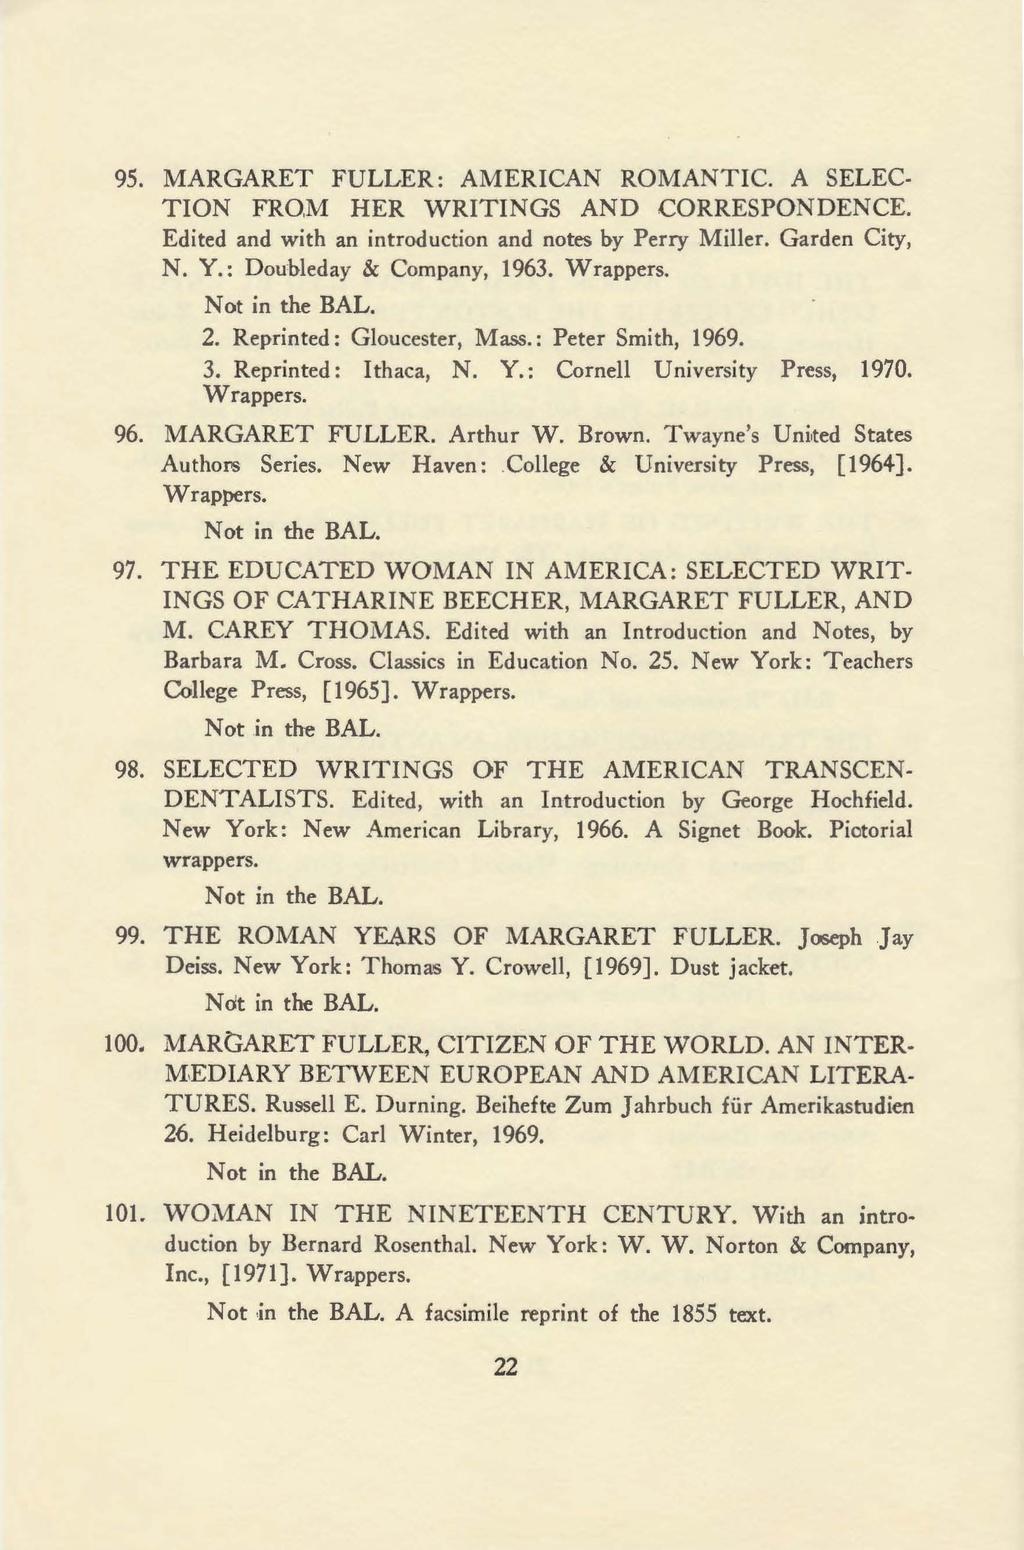 95. MARGARET FULLER: AMERICAN ROMANTIC. A SELEC TION FROM HER WRITINGS AND CORRESPONDENCE. Edited and with an introduction and notes by Perry Miller. Garden City, N. Y.: Doubleday & Company, 1963.